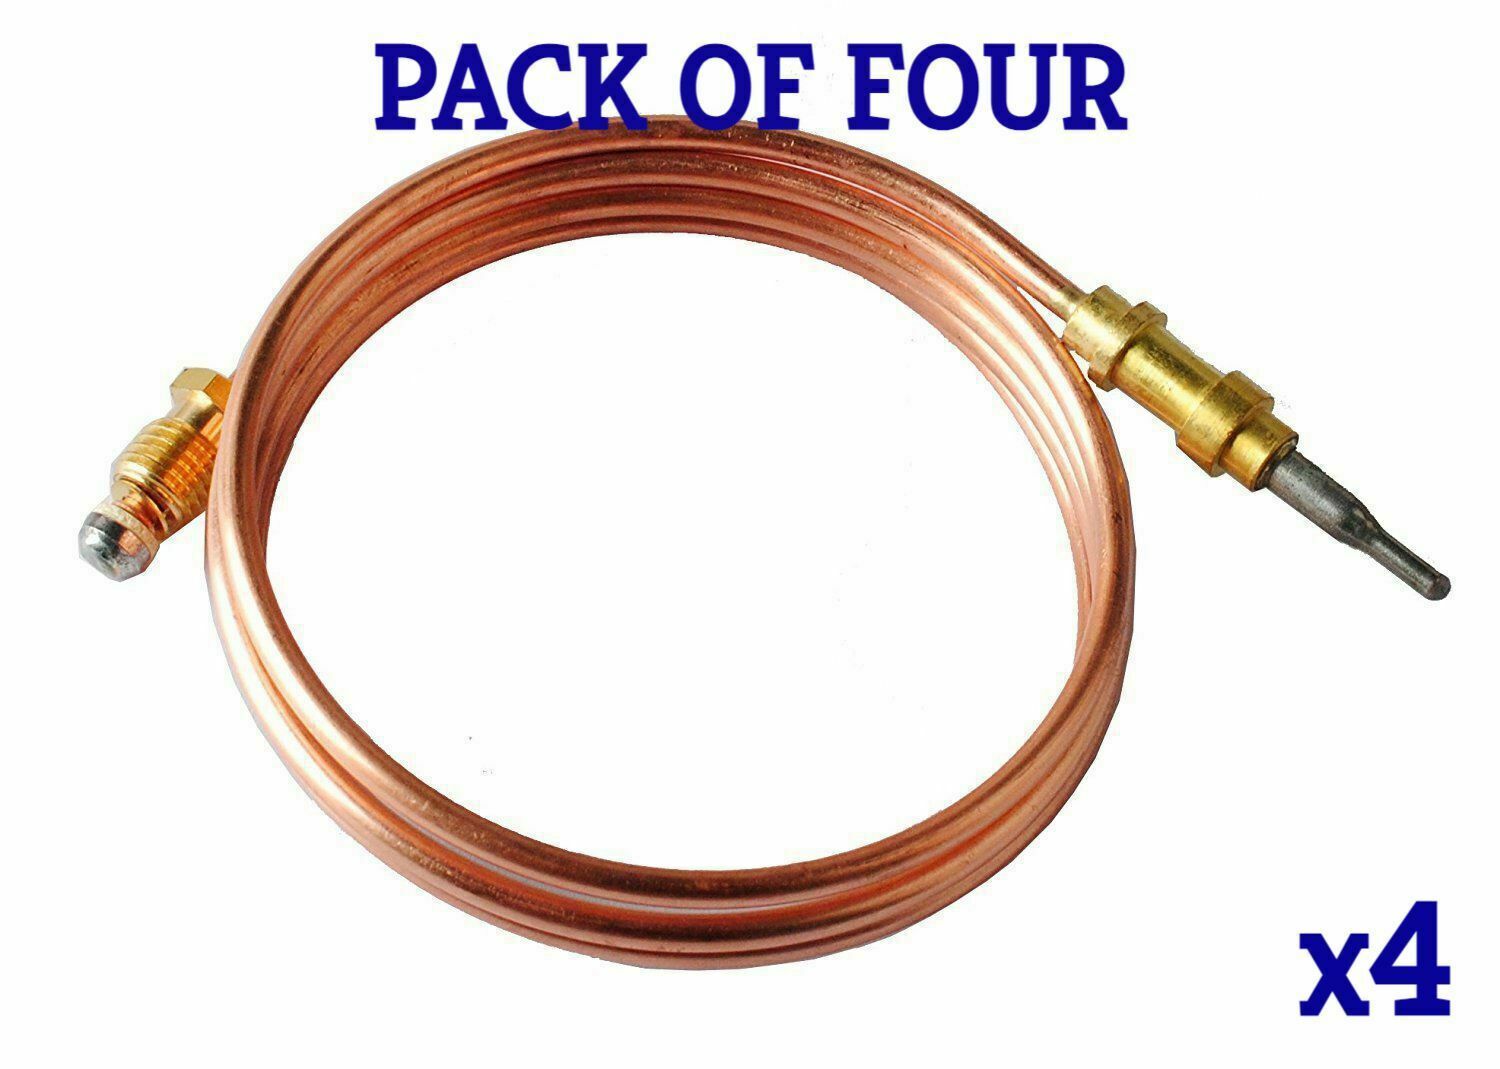 PACK OF FOUR Thermocouple replacement for Desa LP Heater 098514-01 098514-02 - $29.69